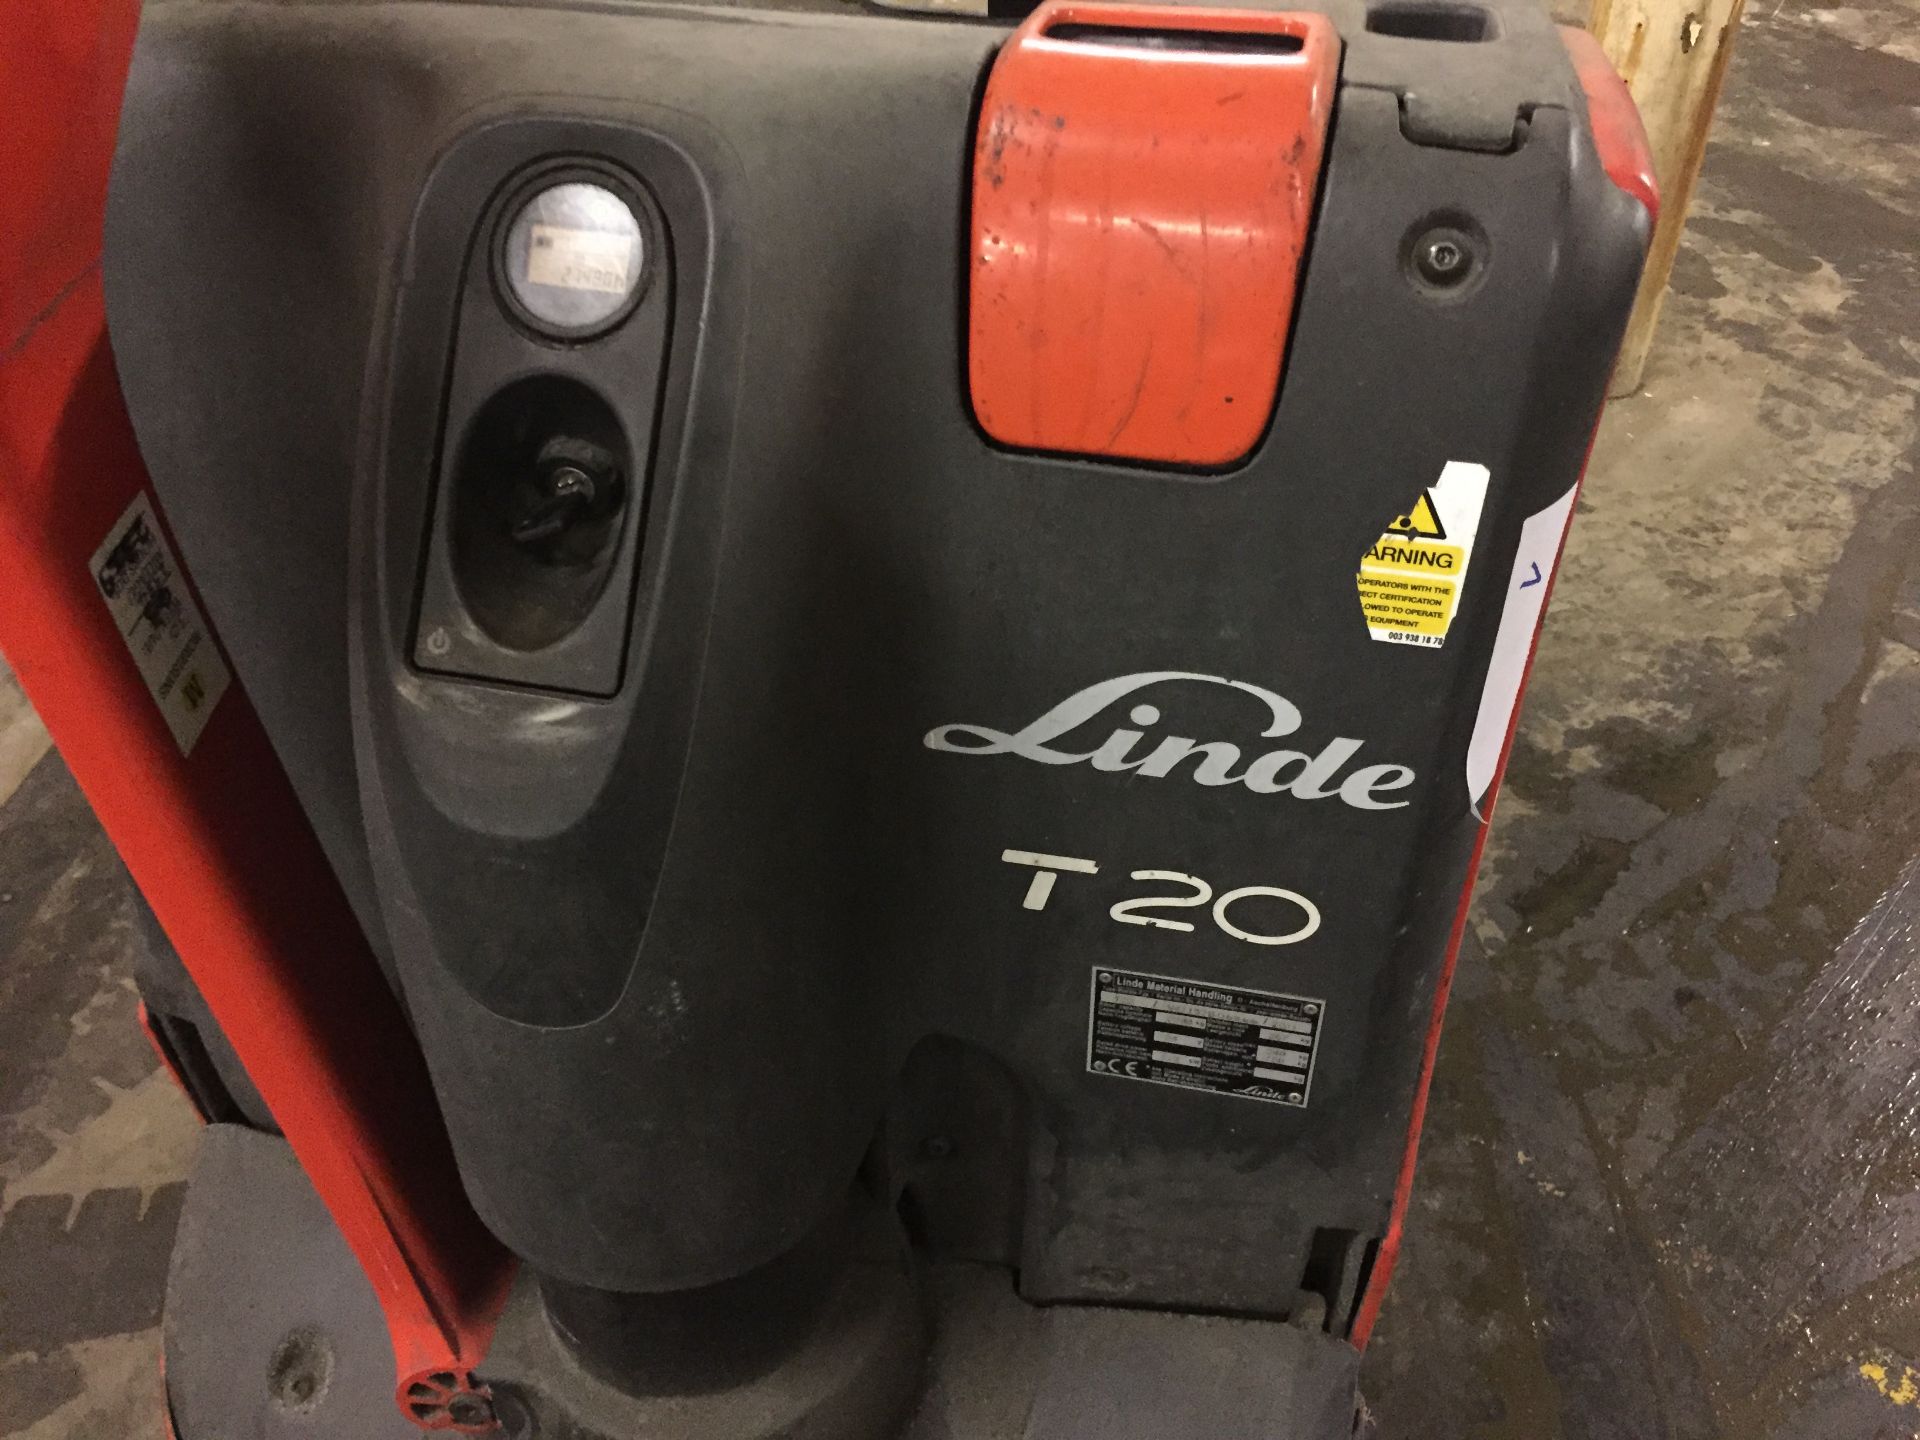 1 x Linde T20 Electric Pallet Truck - Tested and Working - Key and Charger Included - Bolton BL1 - Image 4 of 9